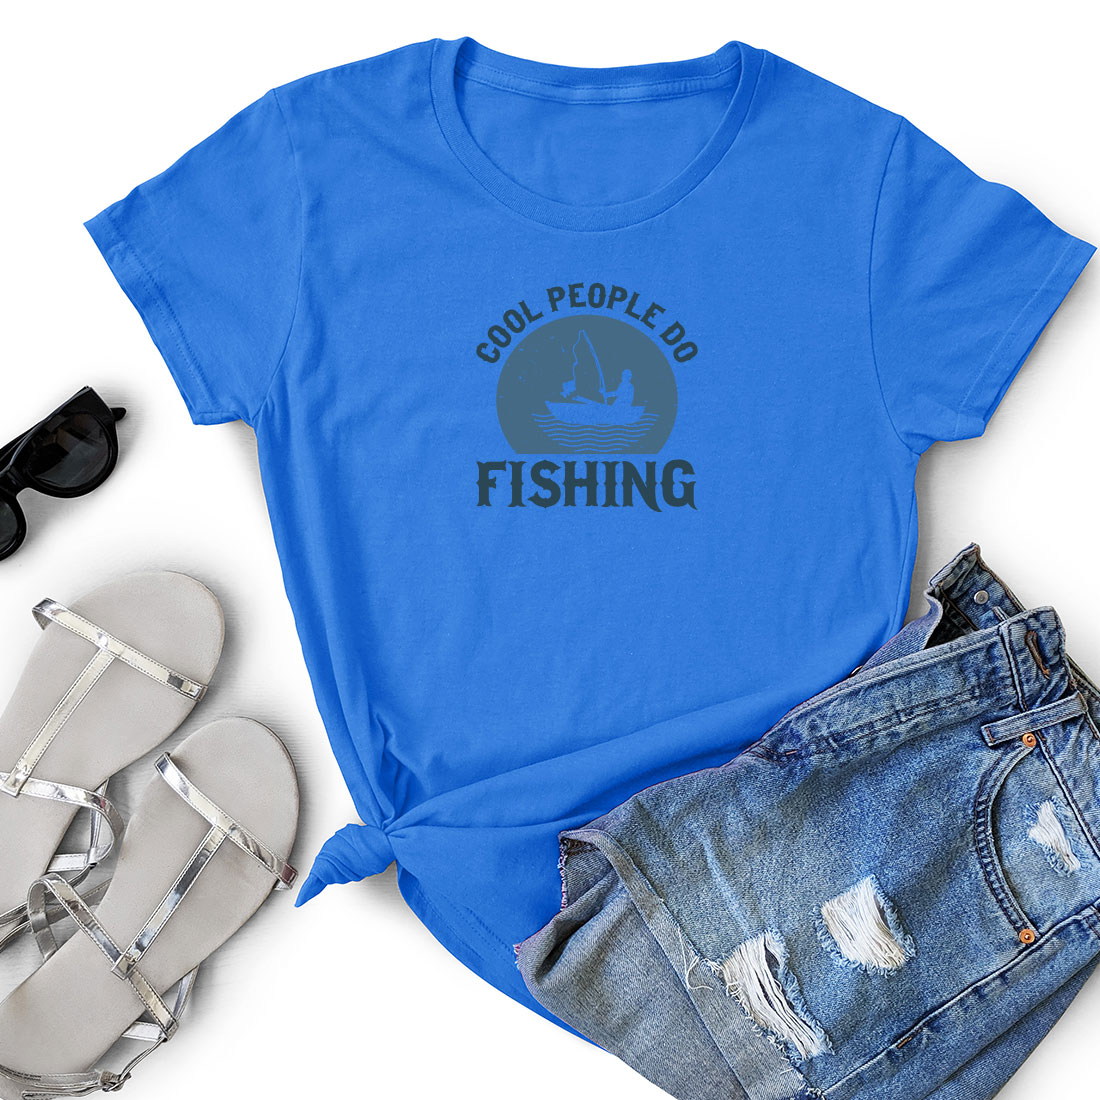 T - shirt that says cool people eat fishing next to a pair of shorts.